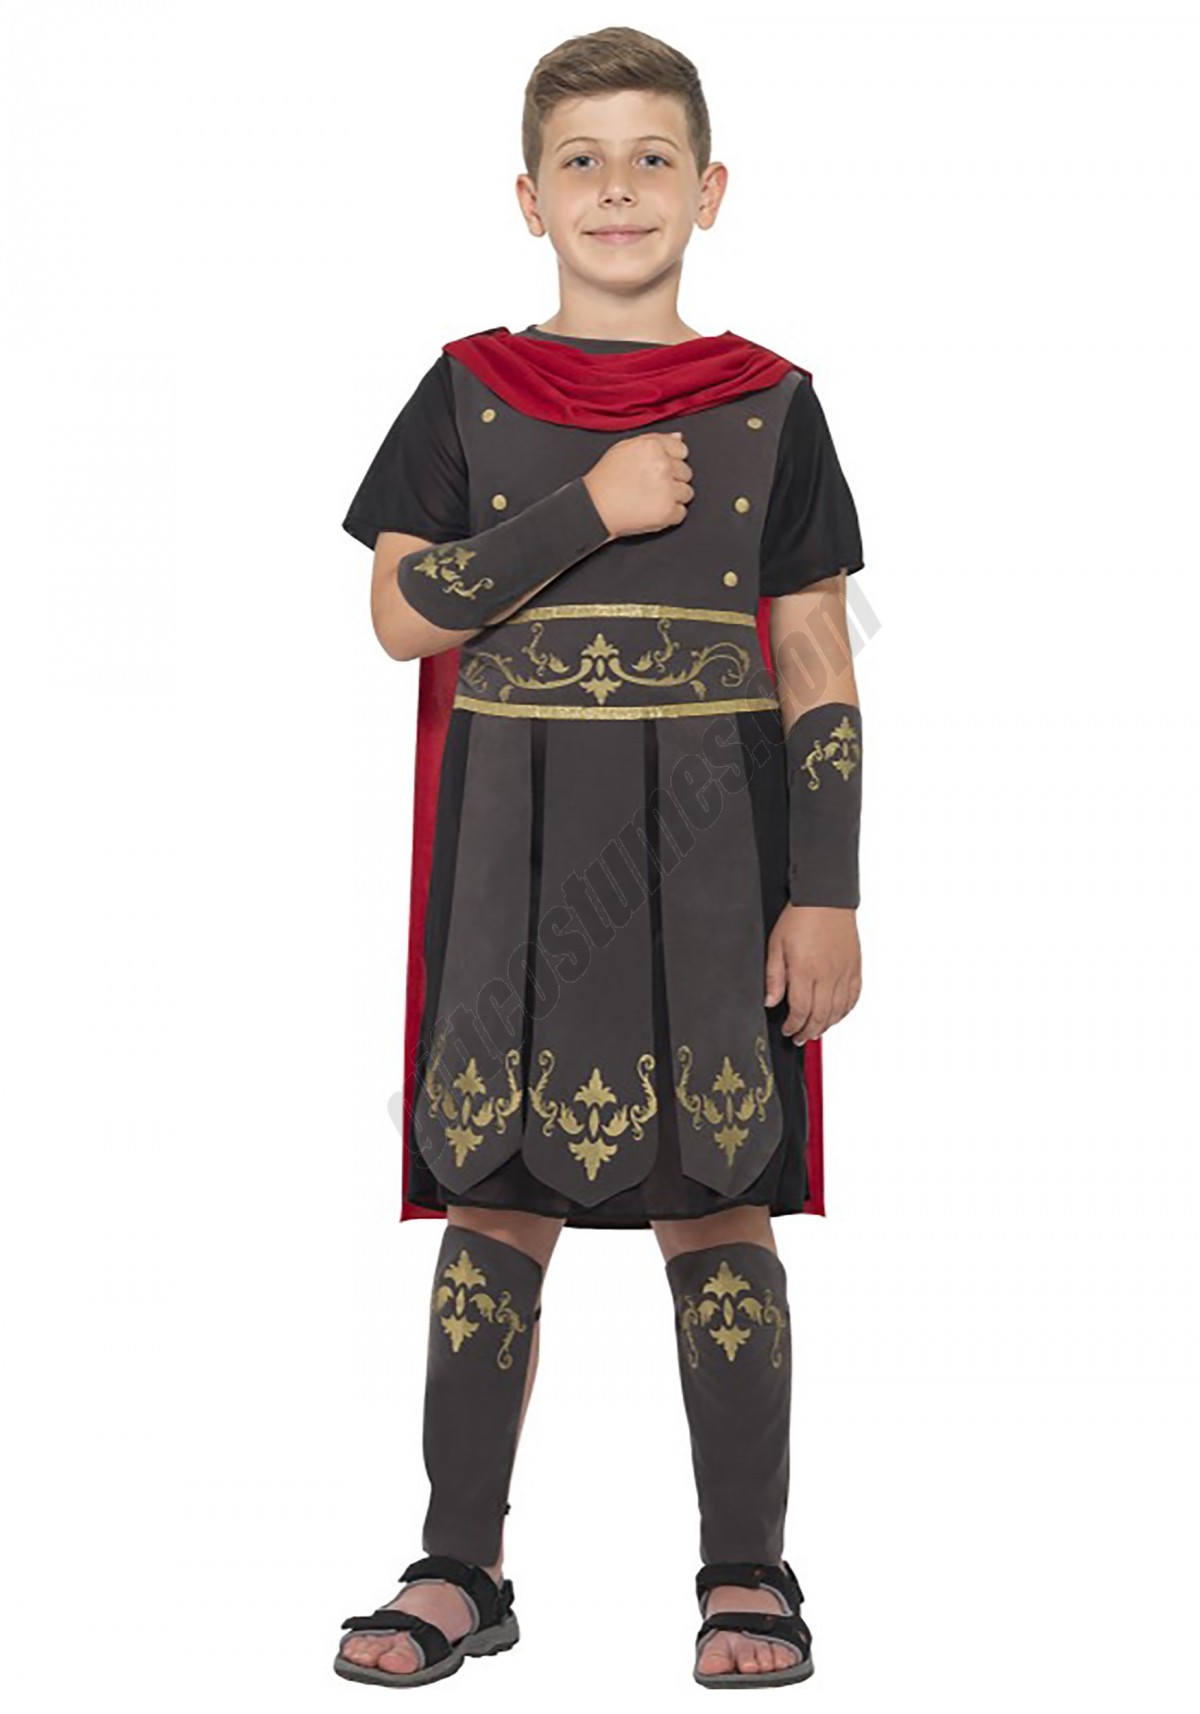 Roman Soldier Costume for Boys Promotions - -0